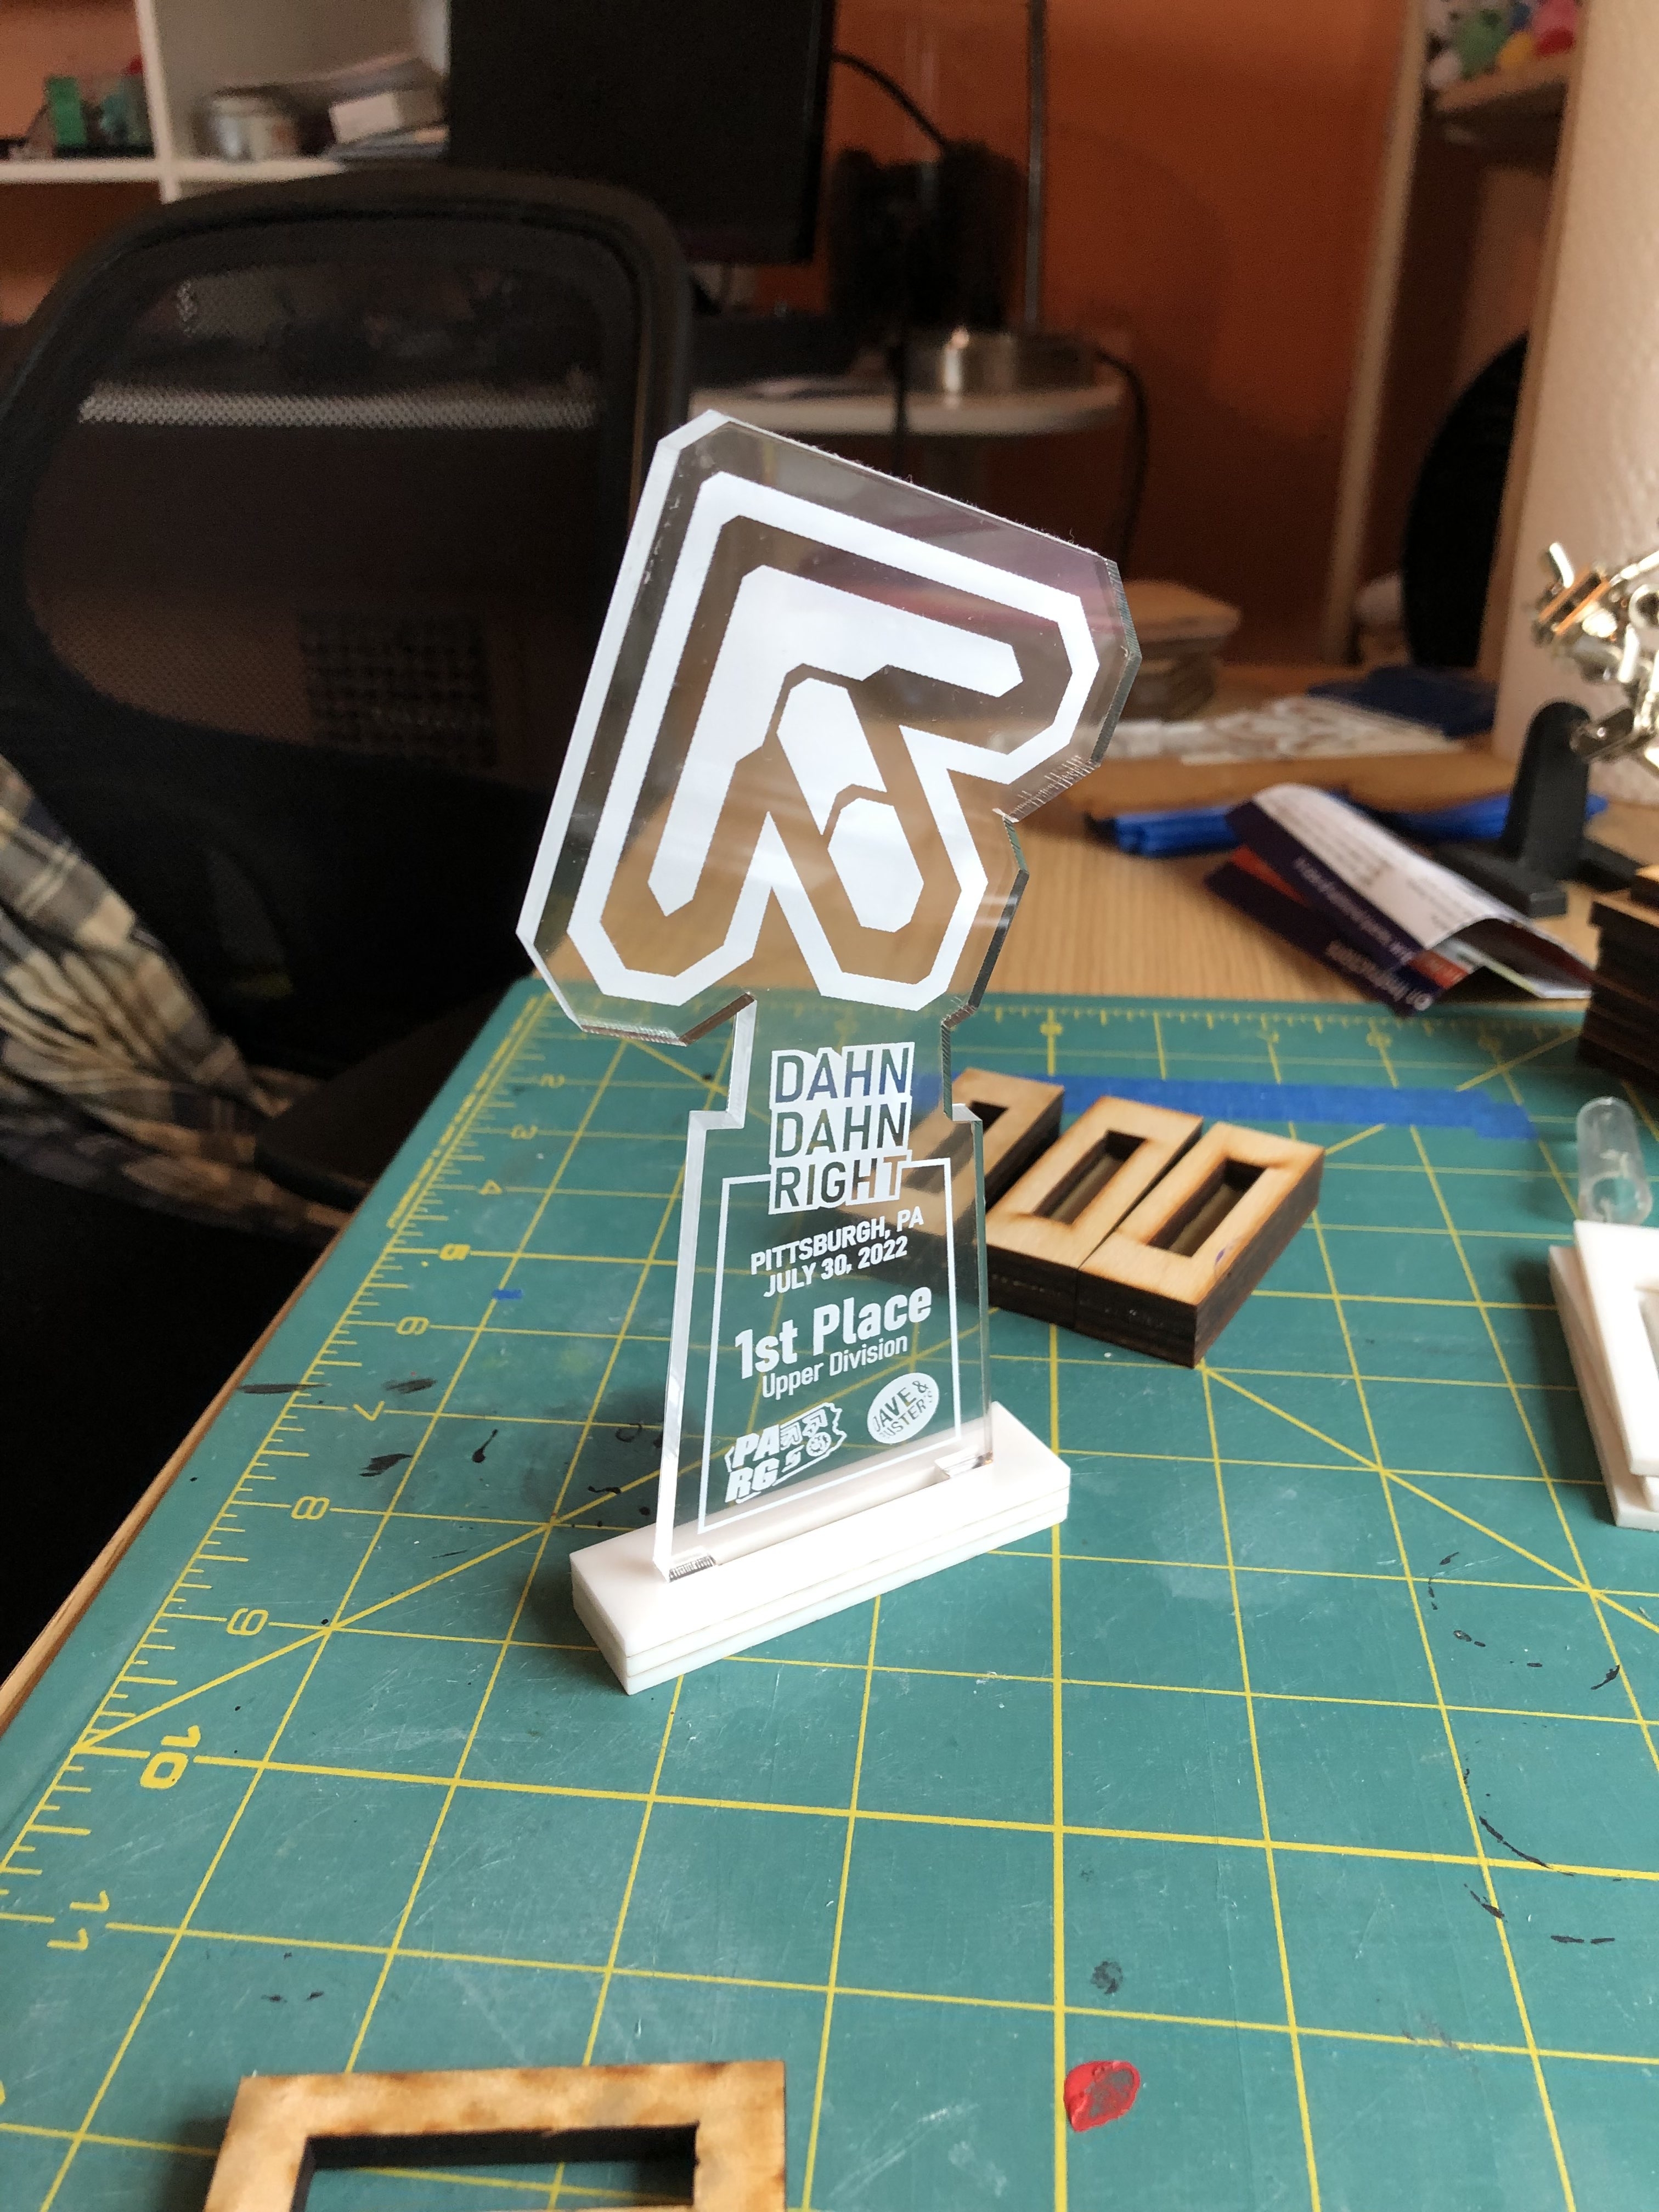 A picture of the Dahn Dahn right trophies from 2022 - laser cut, work in progress